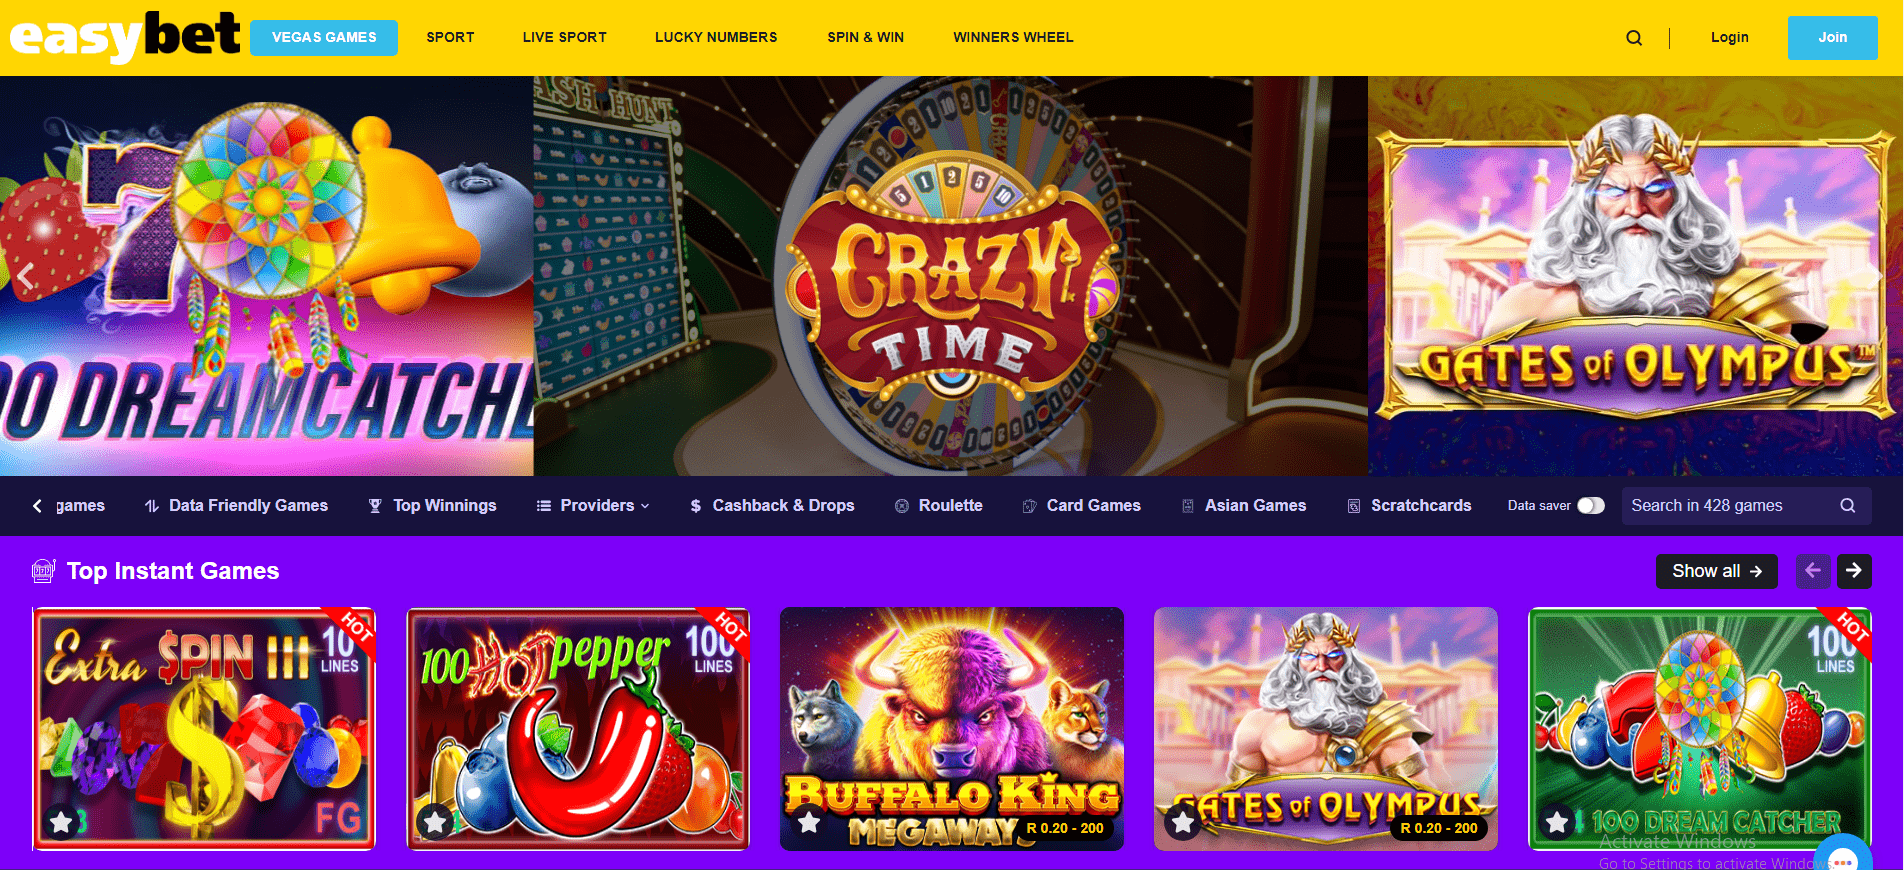 Easybet Casino Page